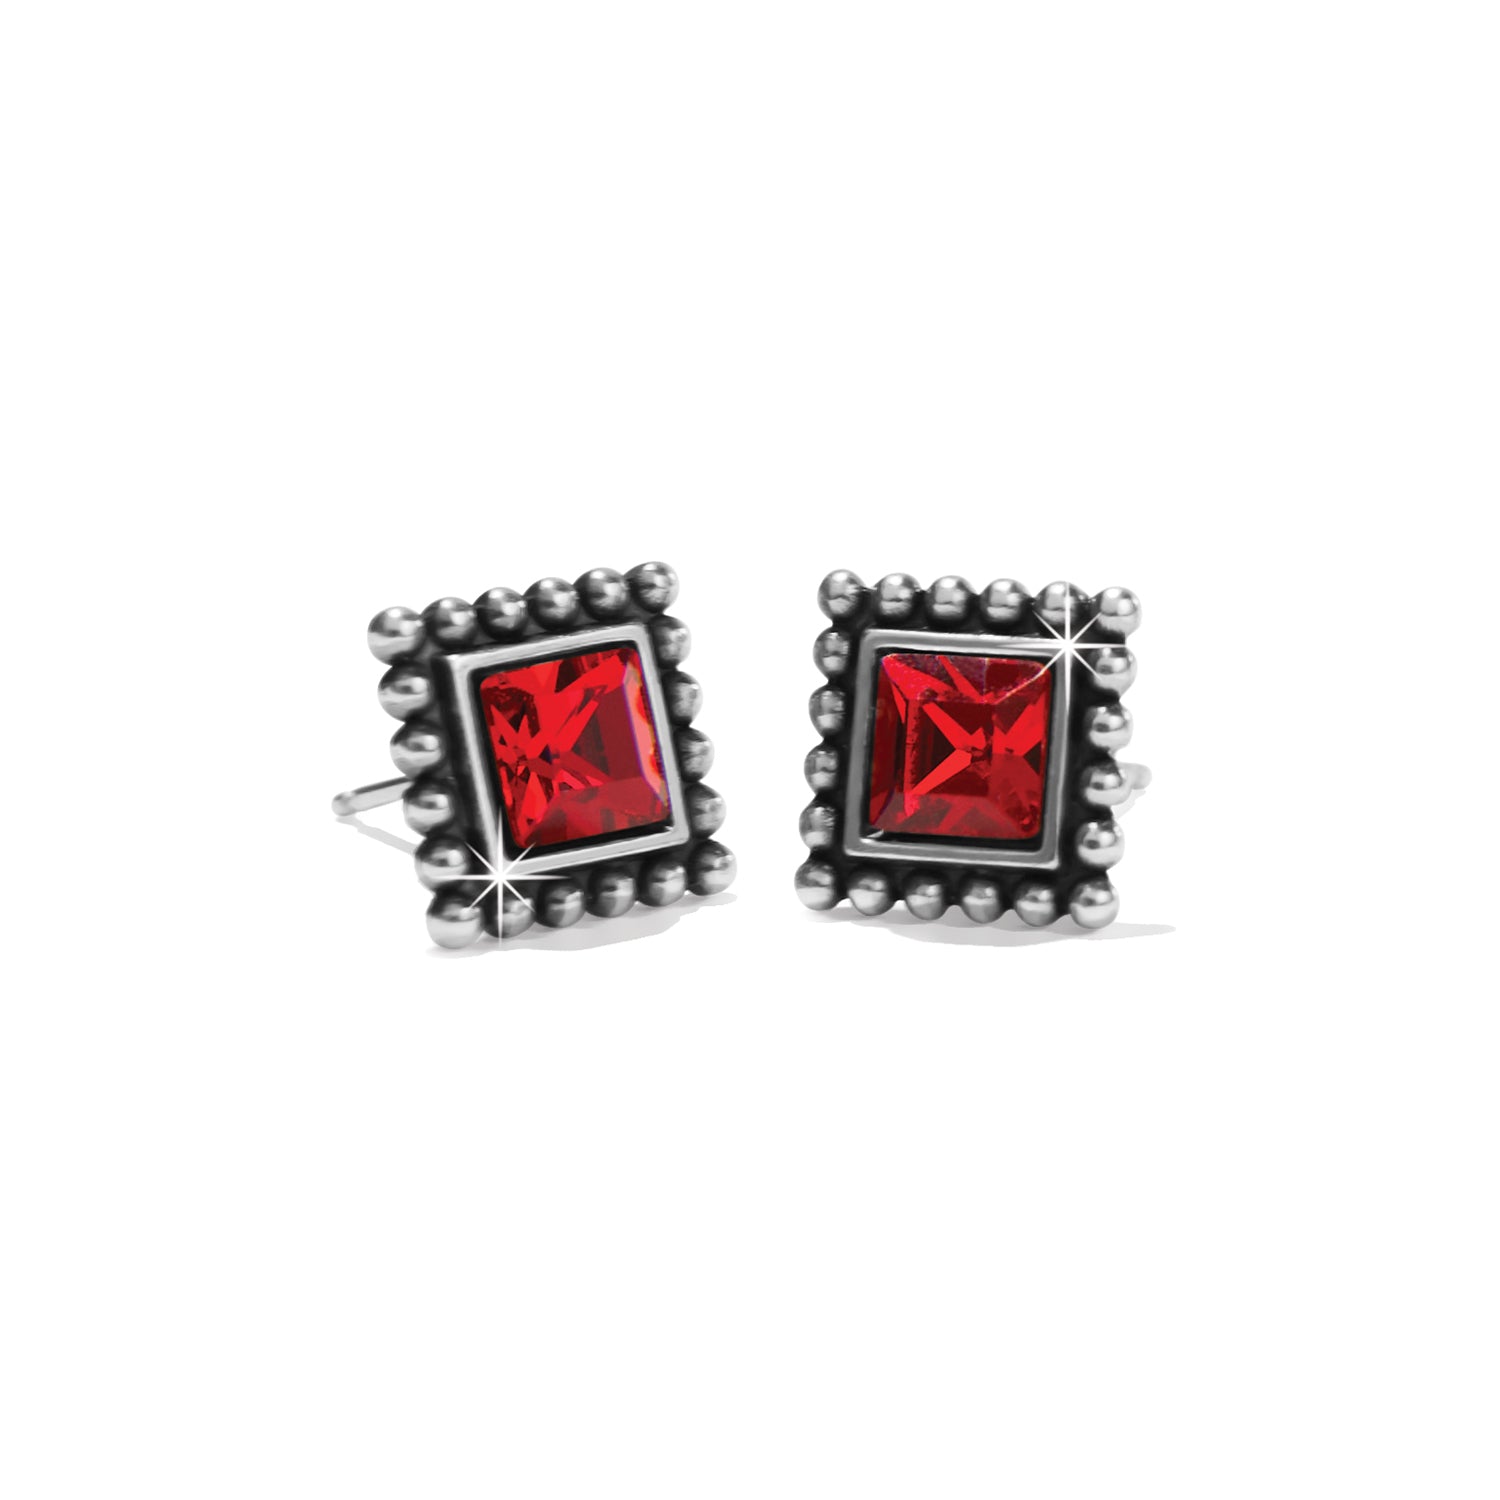 7mm square 925 sterling silver stud earrings for men, shiny. – Sharon  SaintDon Silver and Gold Handmade Jewelry